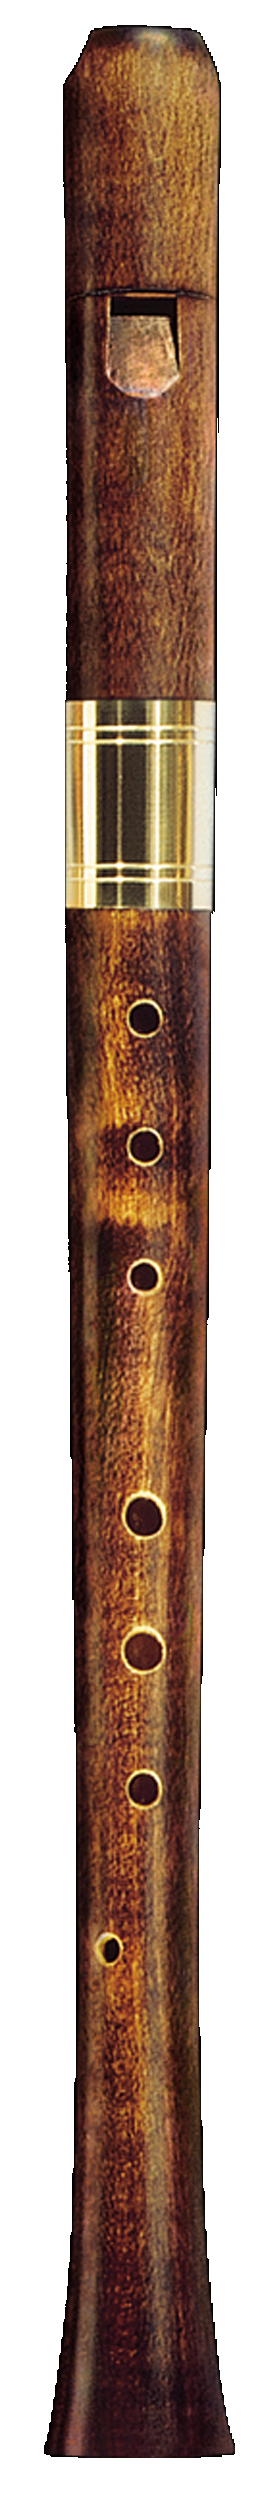 Moeck Renaissance Consort Oiled and Stained Maple Wood Alto Recorder W/ Single Holes - 8320